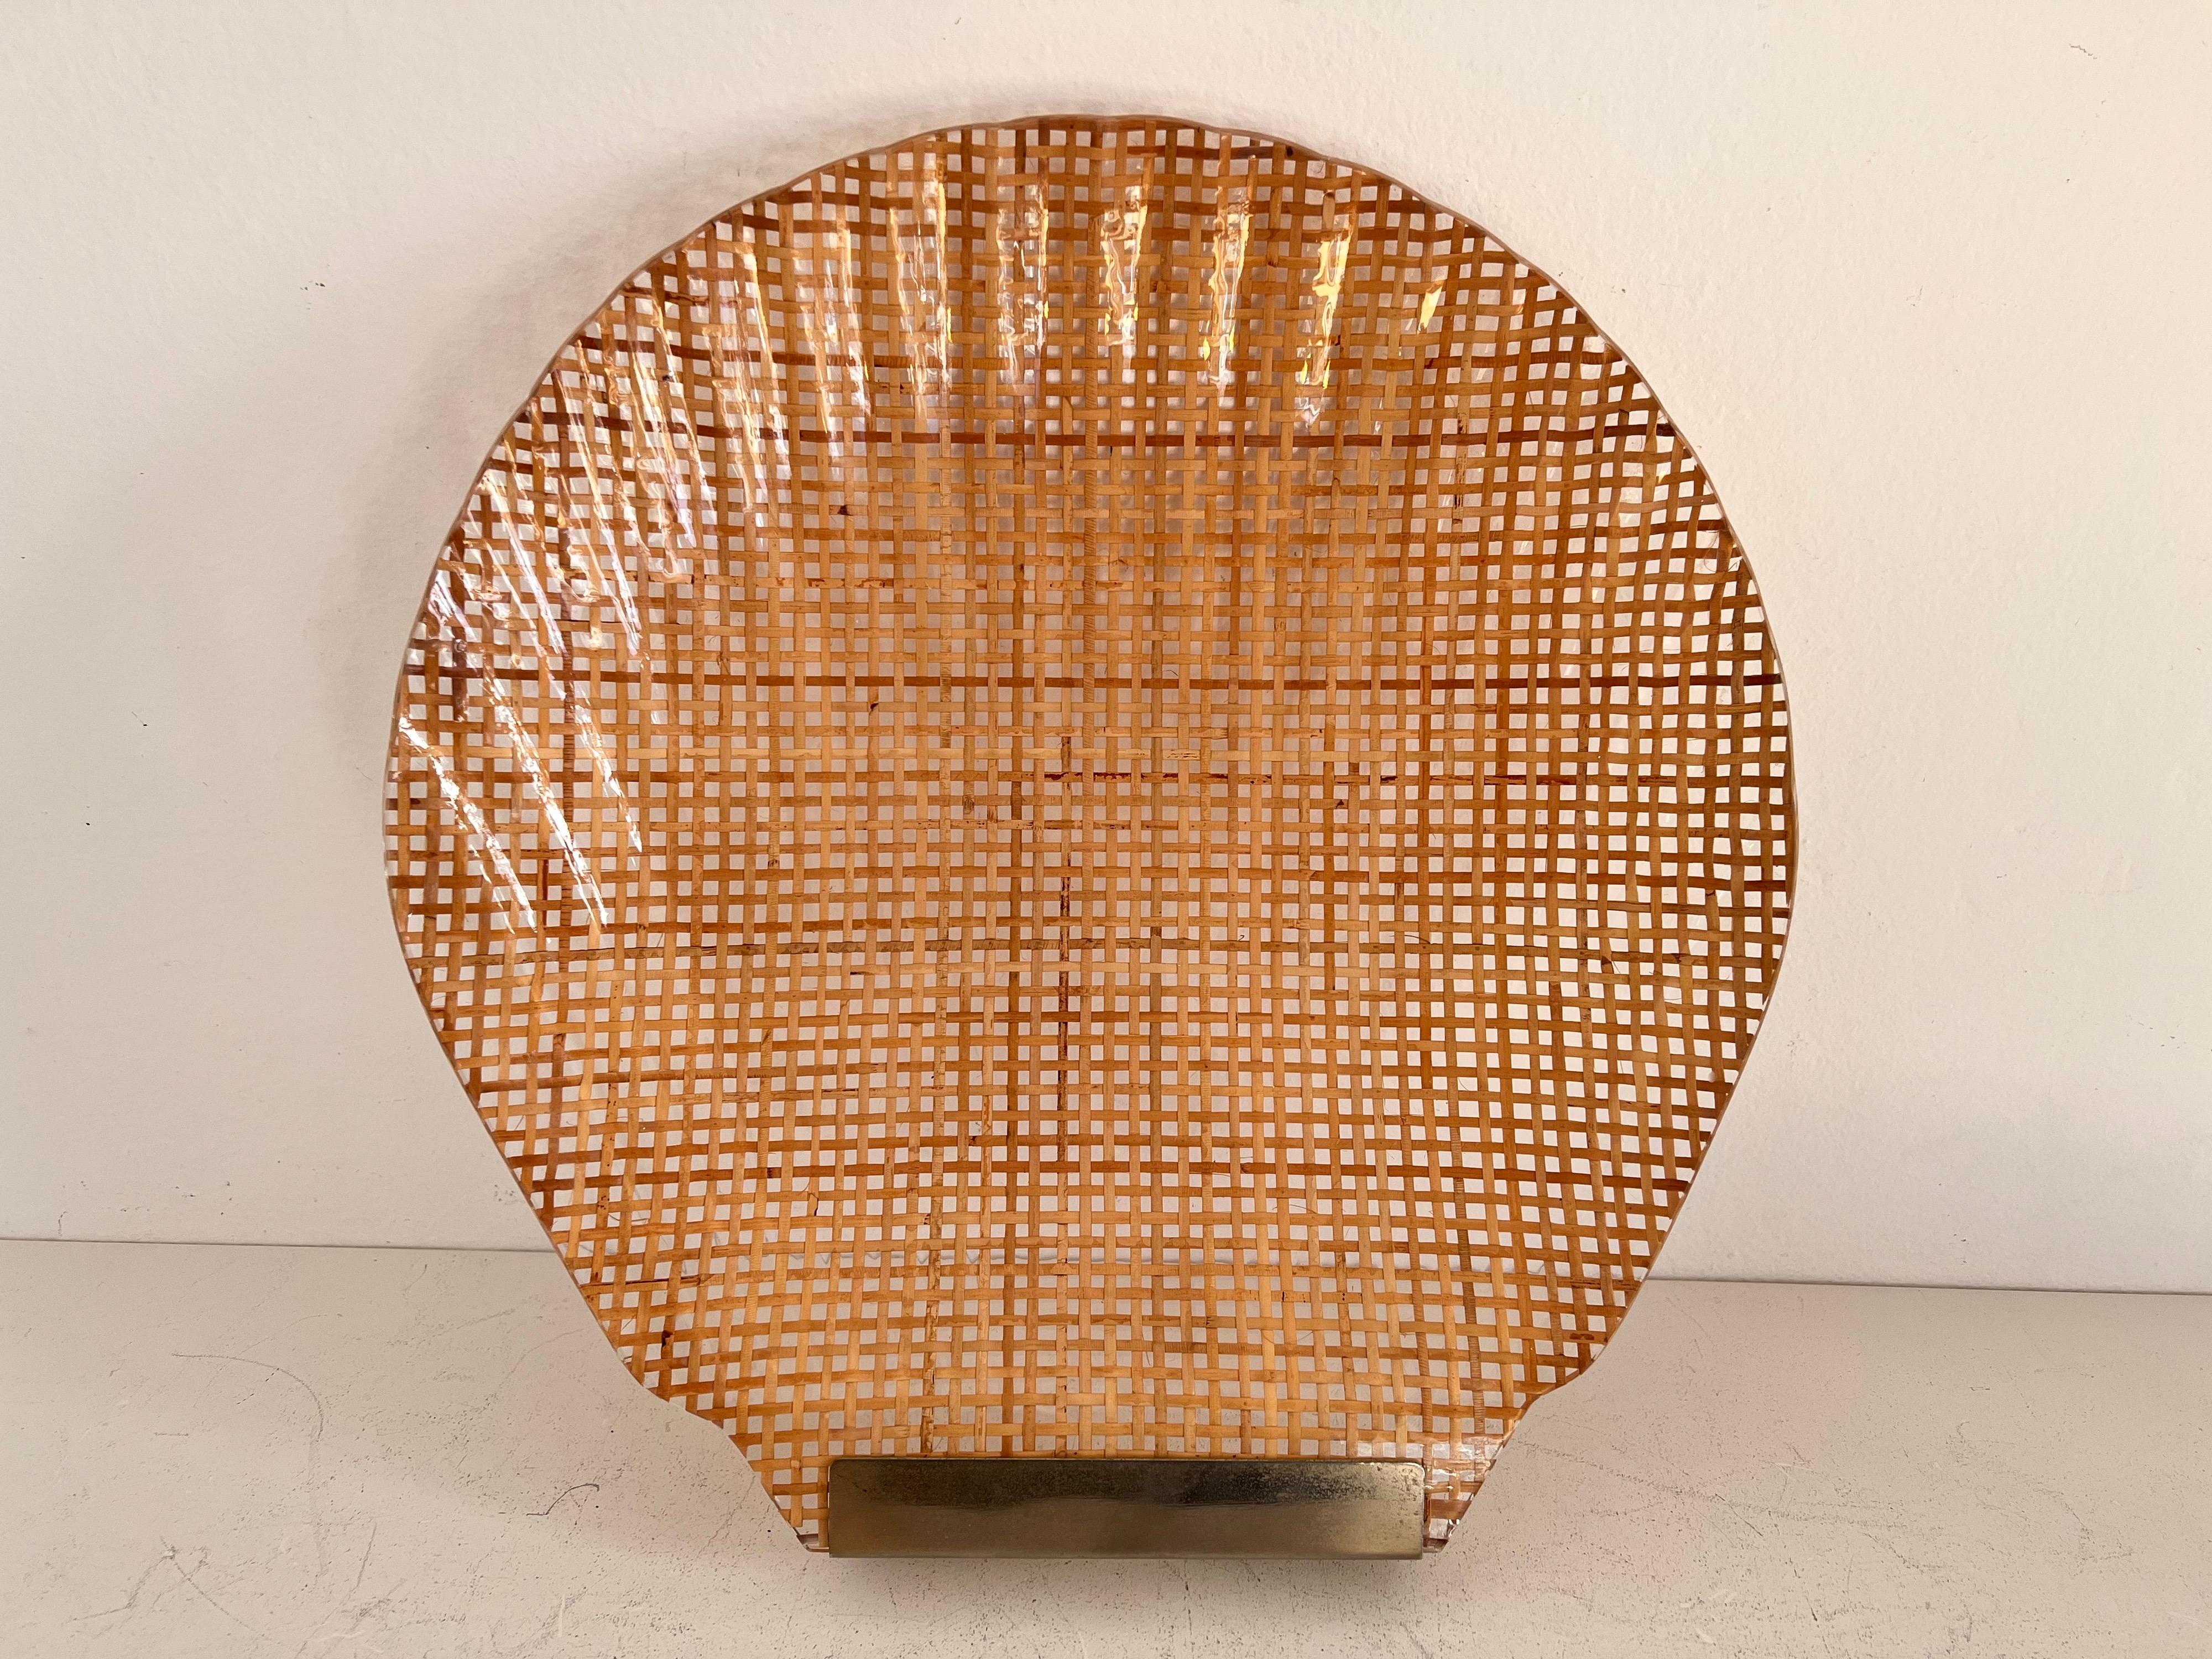 Italian MidCentury Serving Tray in Lucite, Rattan and Brass in Shell Shape, 1970 For Sale 11